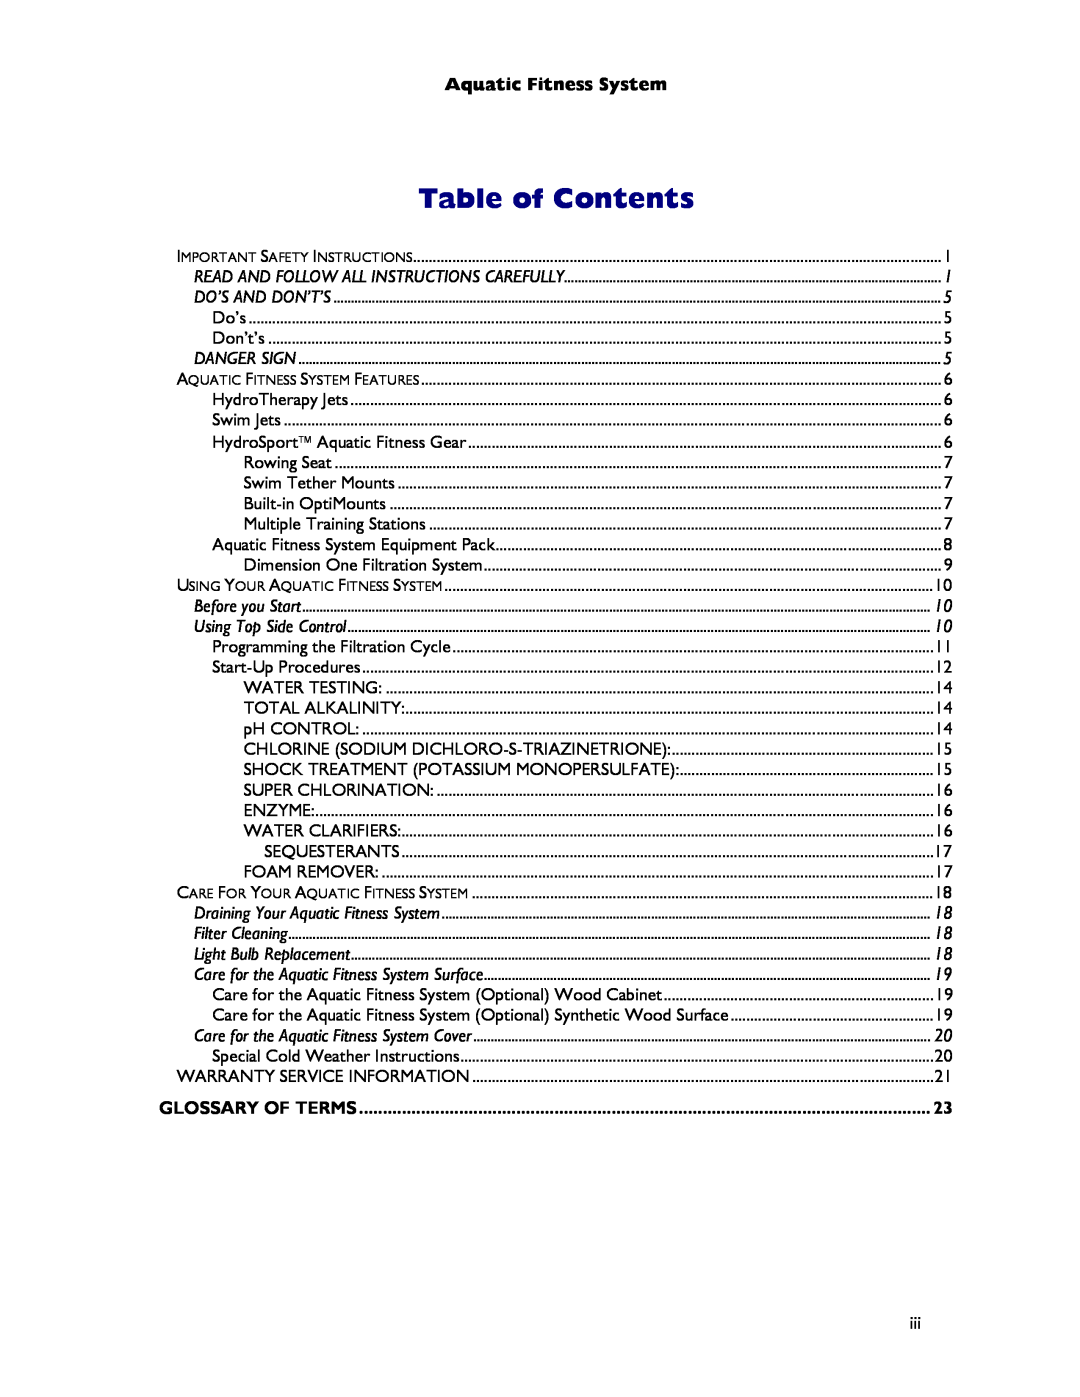 Dimension One Spas Aquatic Fitness System owner manual Table of Contents 